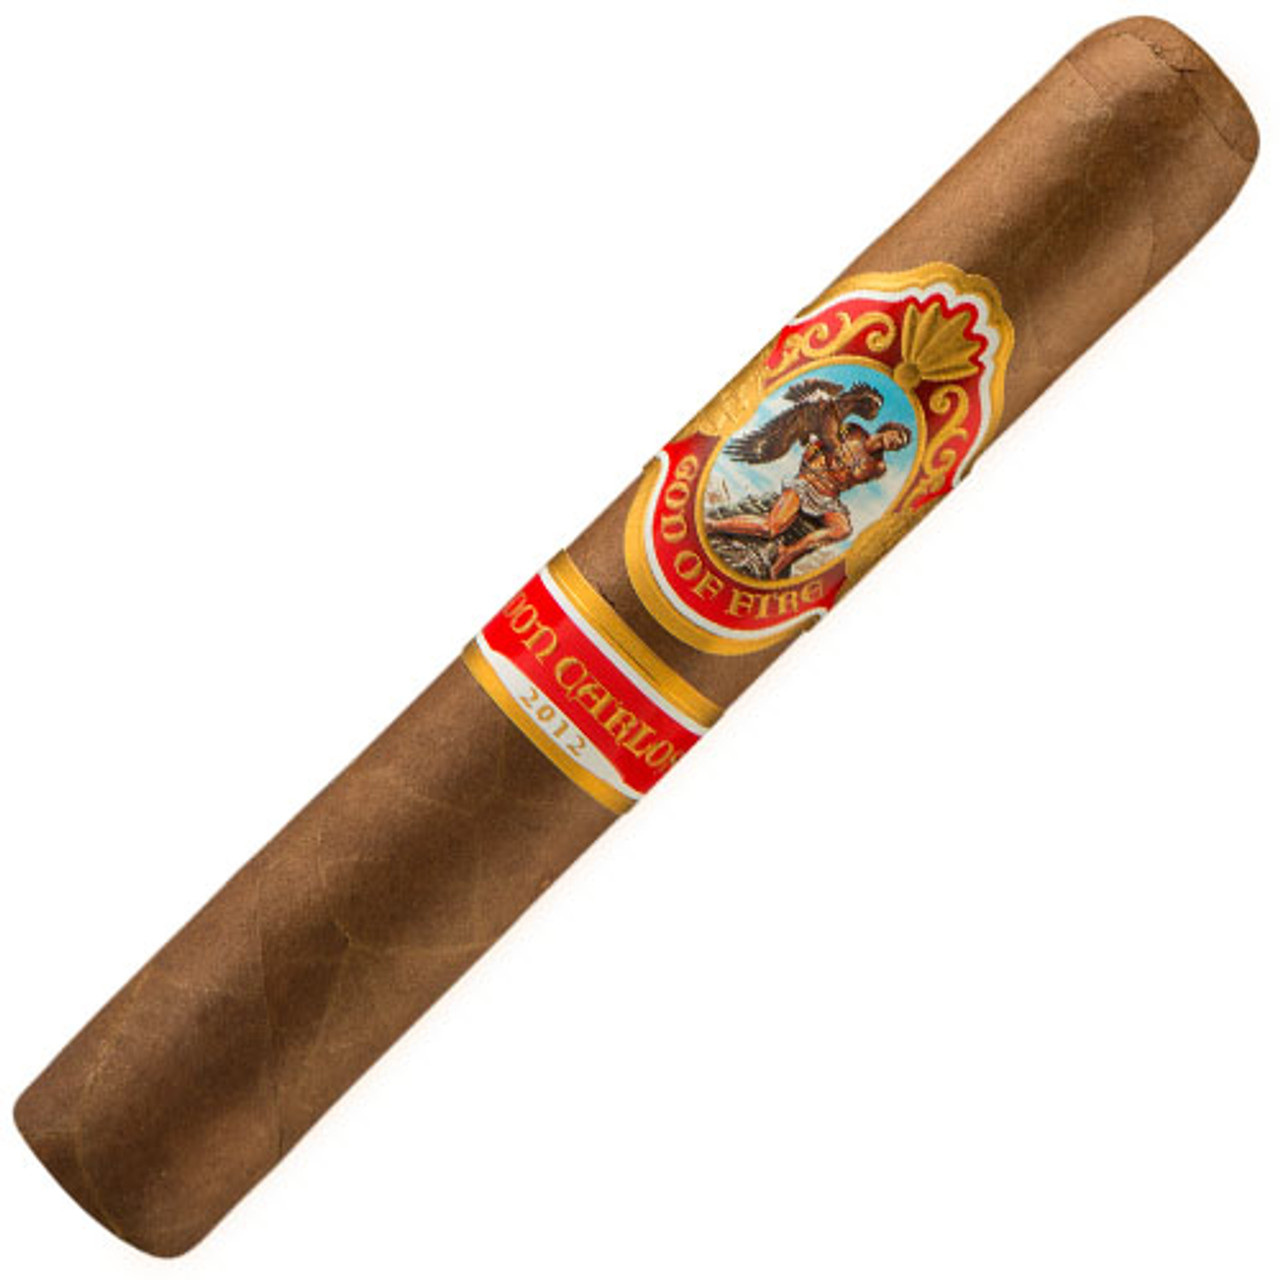 God of Fire by Don Carlos Robusto Cigars - 5.25 x 50 (Box of 10)